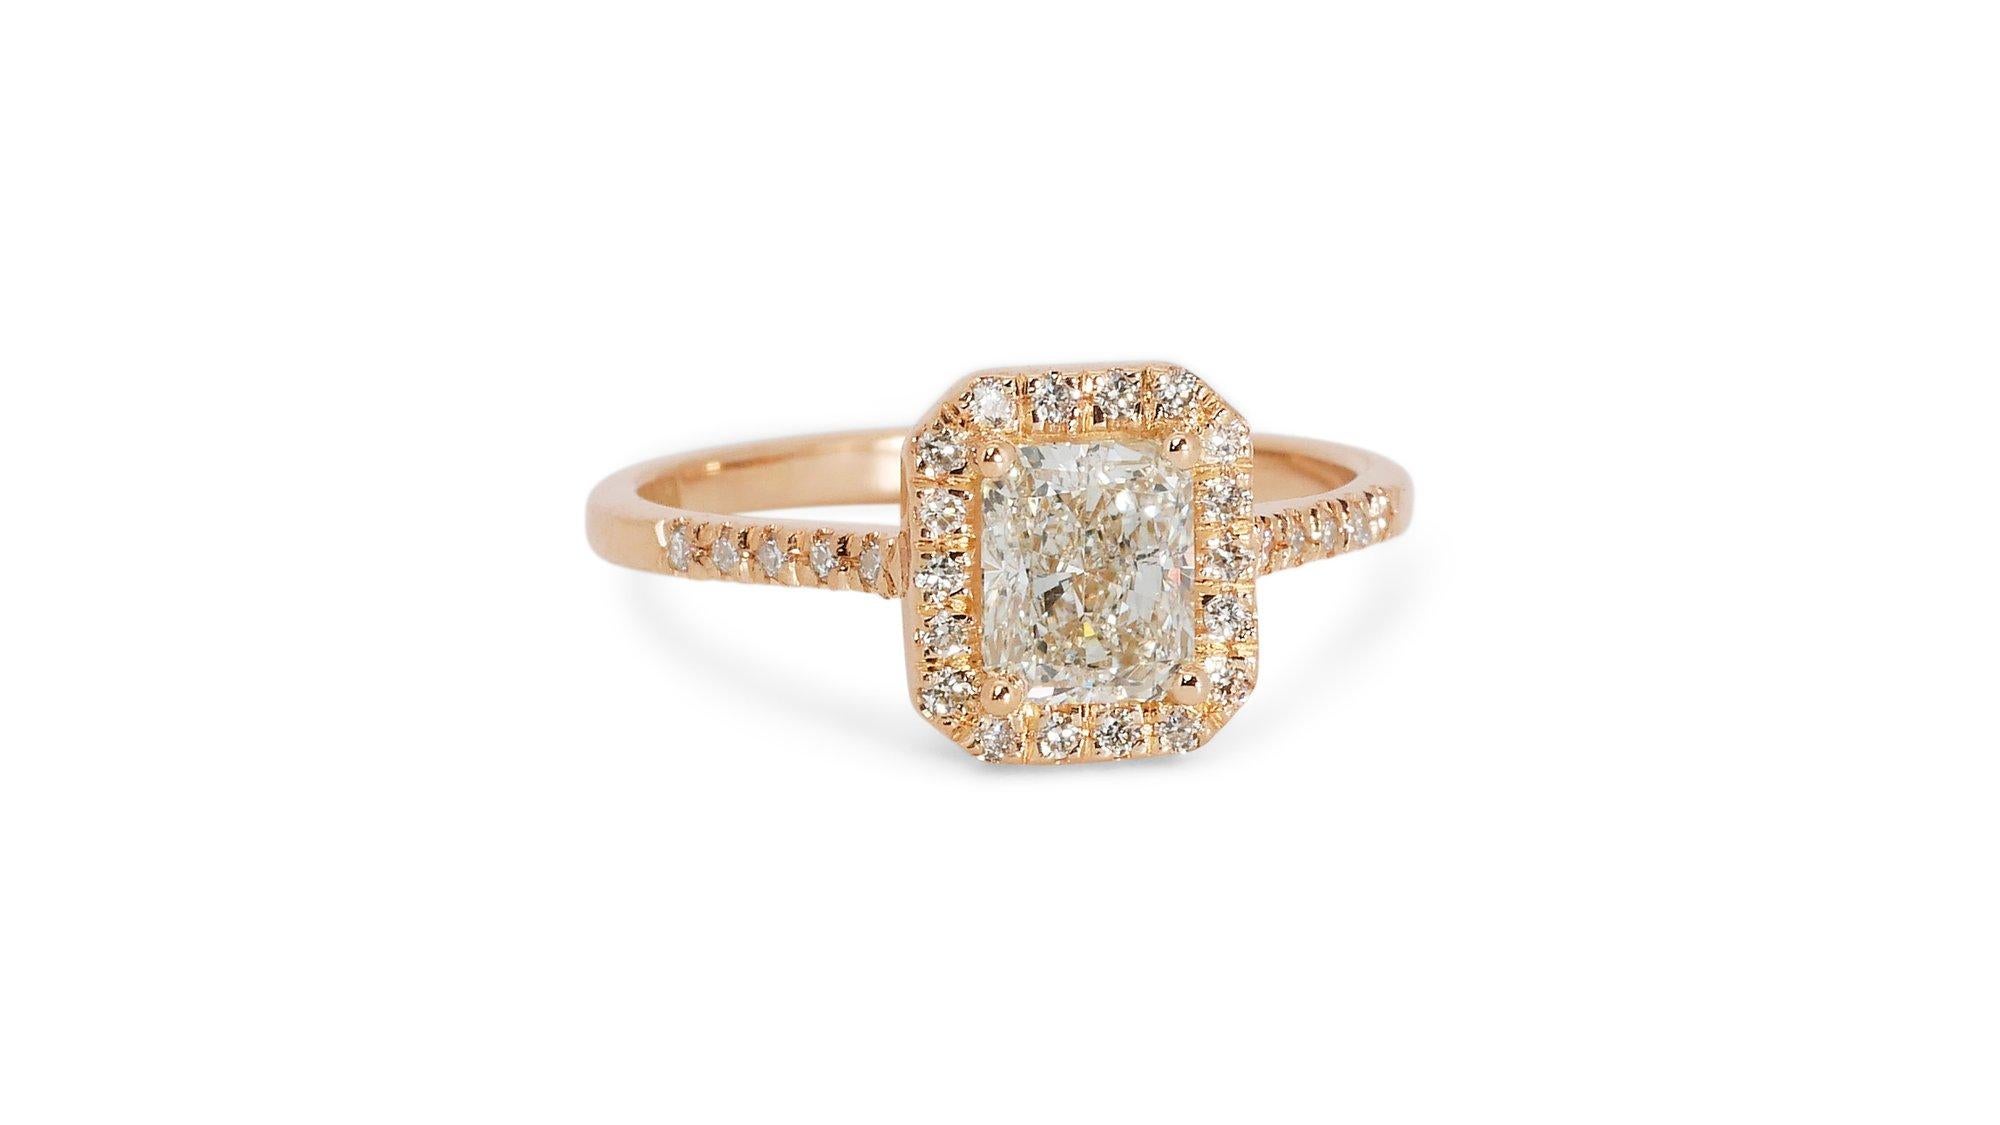 Women's Glamorous 18k Yellow Gold Natural Diamond Halo Ring w/1.72 ct - GIA Certified For Sale